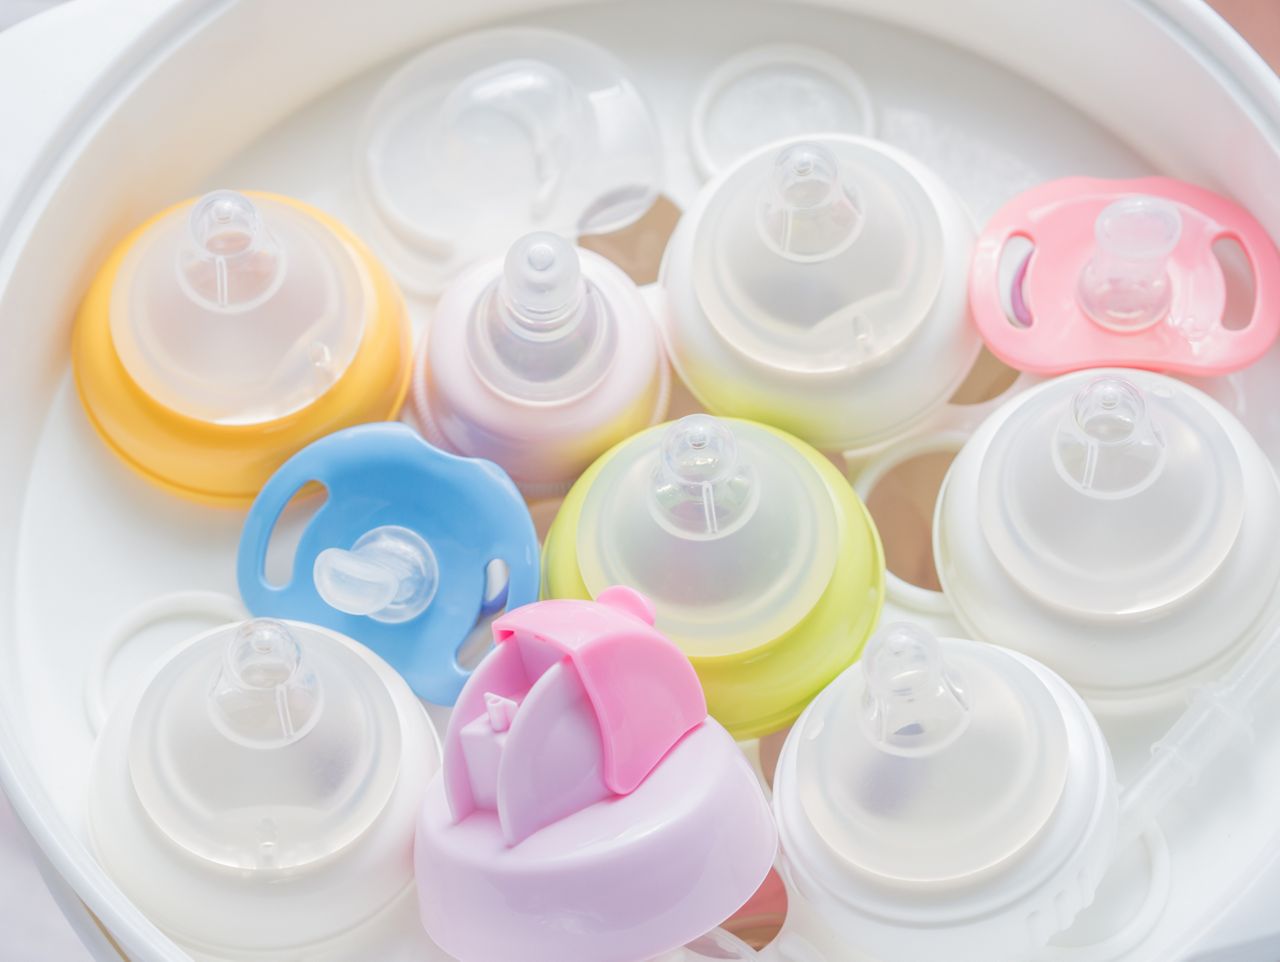 Find out how to choose the best bottle and teat for your baby